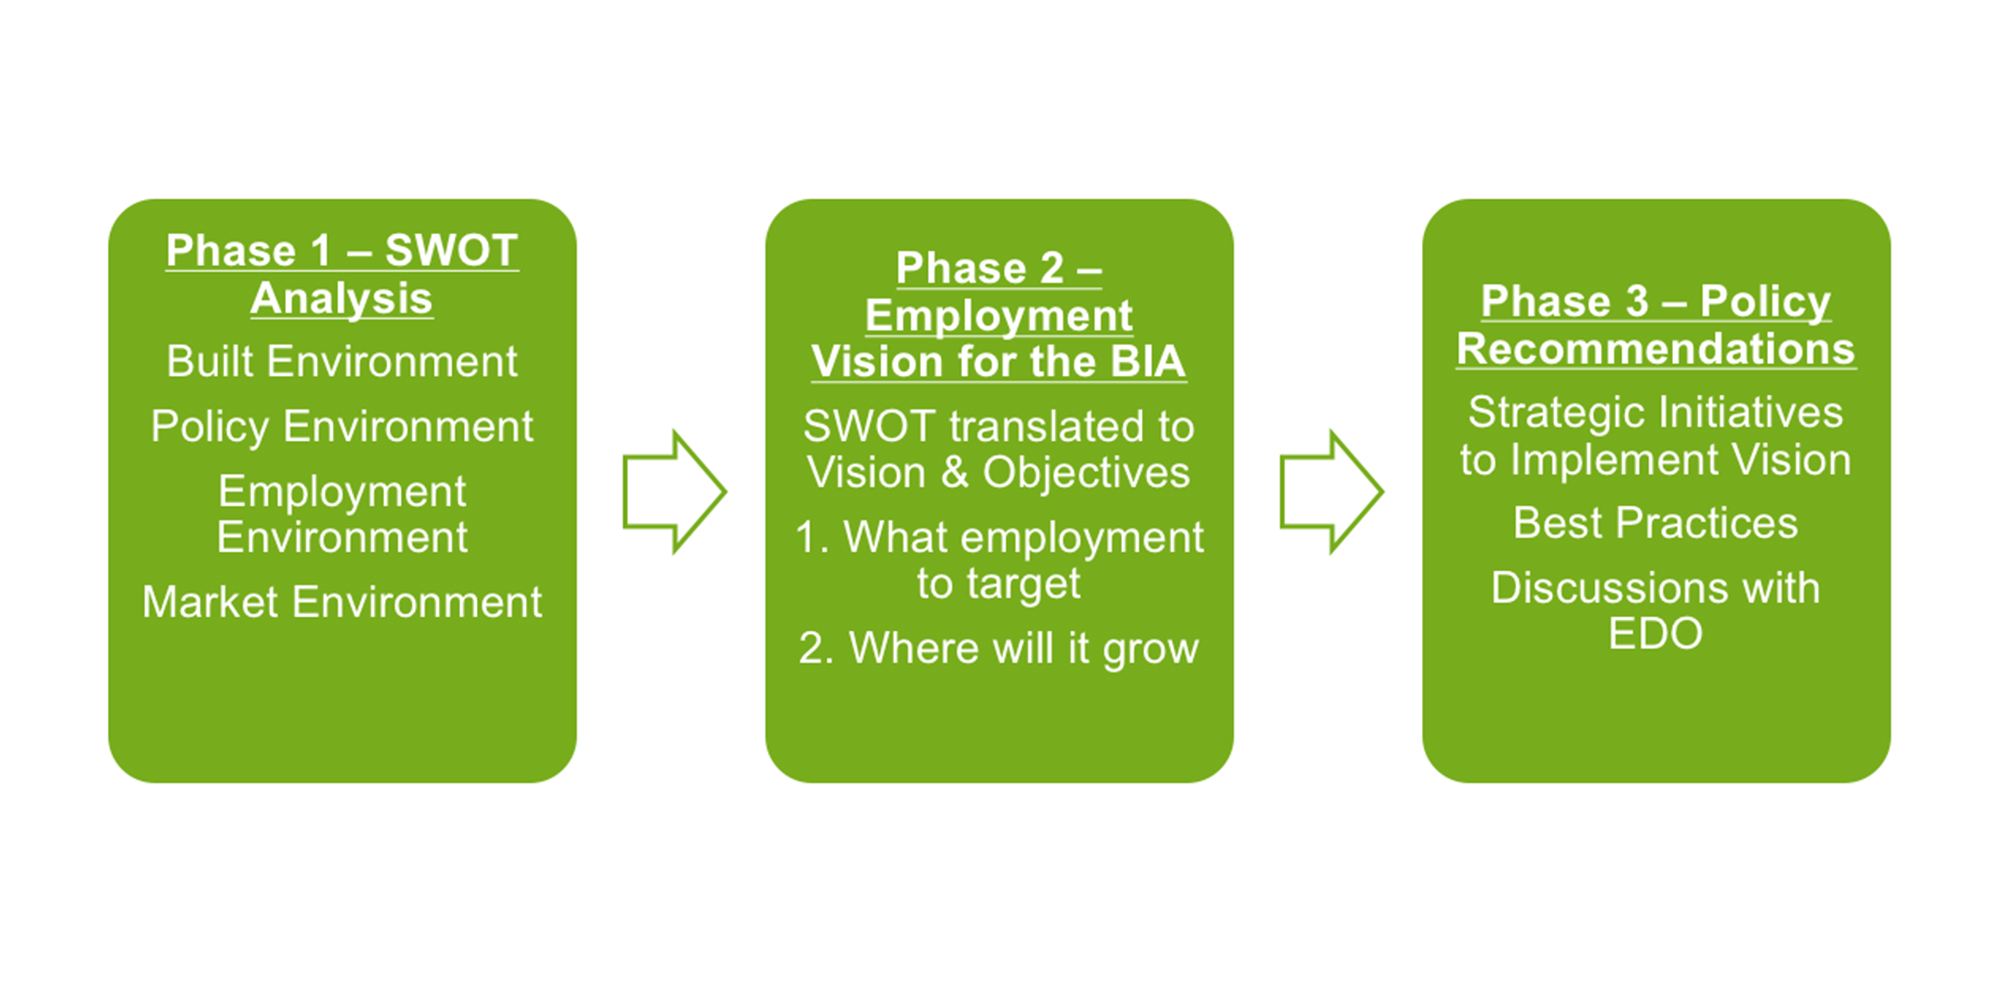 3 Phases of Business Impact Analysis. 1. SWOT Analysis 2. Employment Vision for the BIA 3. Policy Recommendations. Algonquin College Student Common Stormwater Management Concept. For full text, download project PDF below